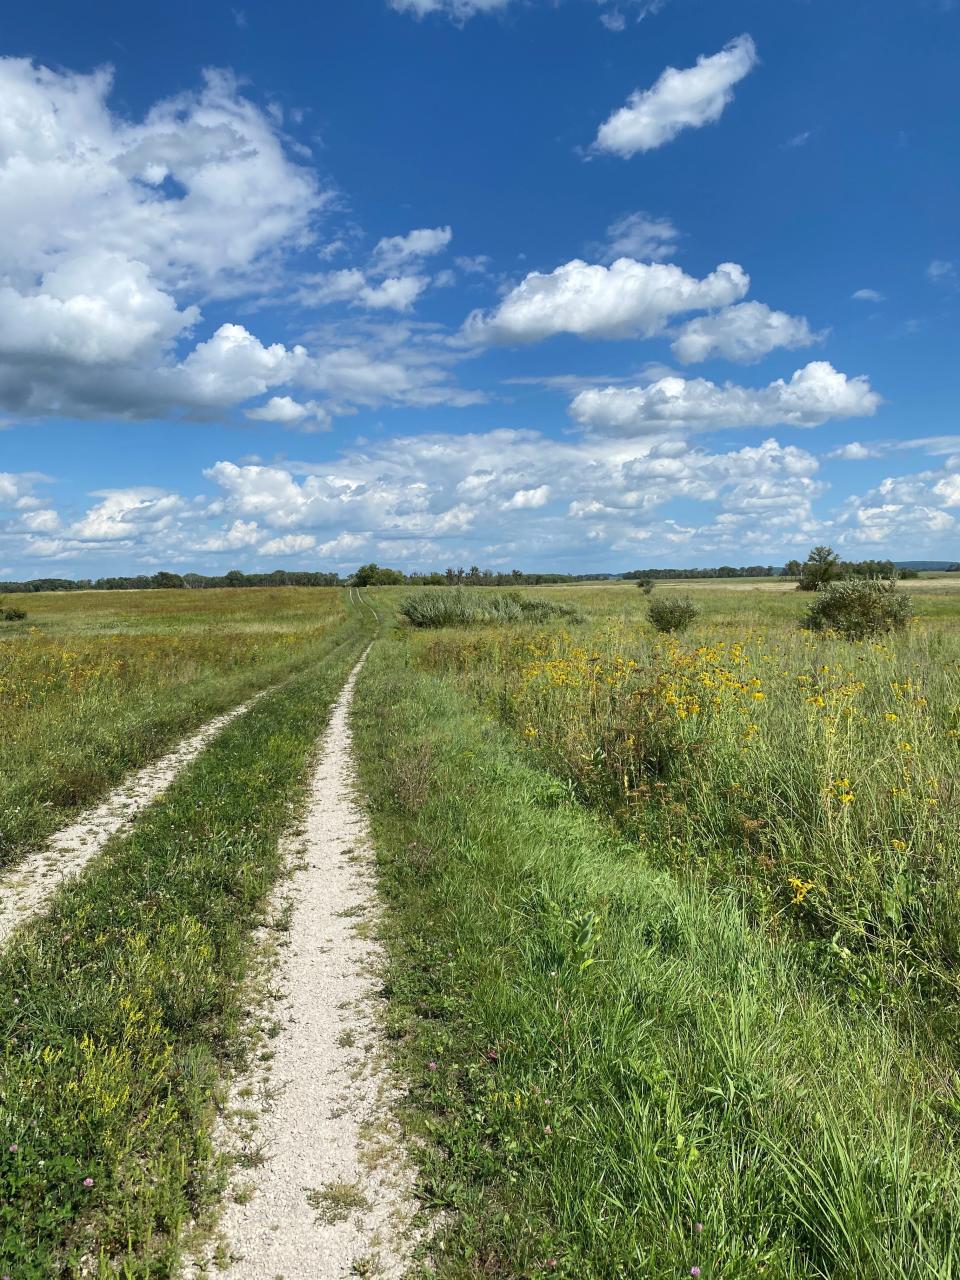 Main Dike Road across the Horicon National Wildlife Refuge is open to cyclists. It is a stunning ride.